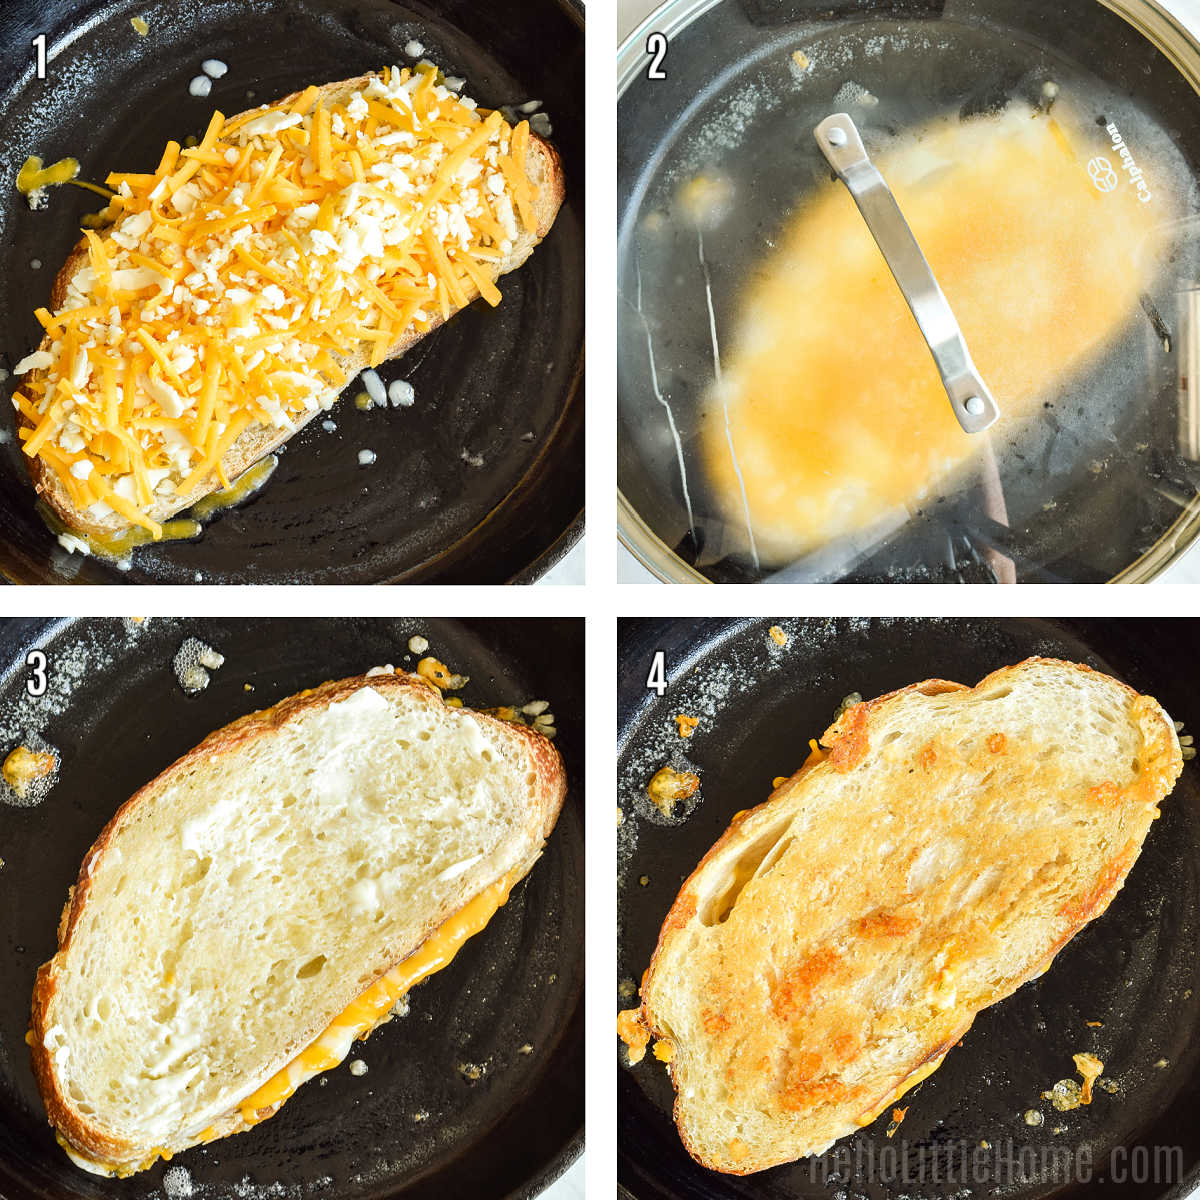 A photo collage showing how to make sourdough grilled cheese step-by-step.